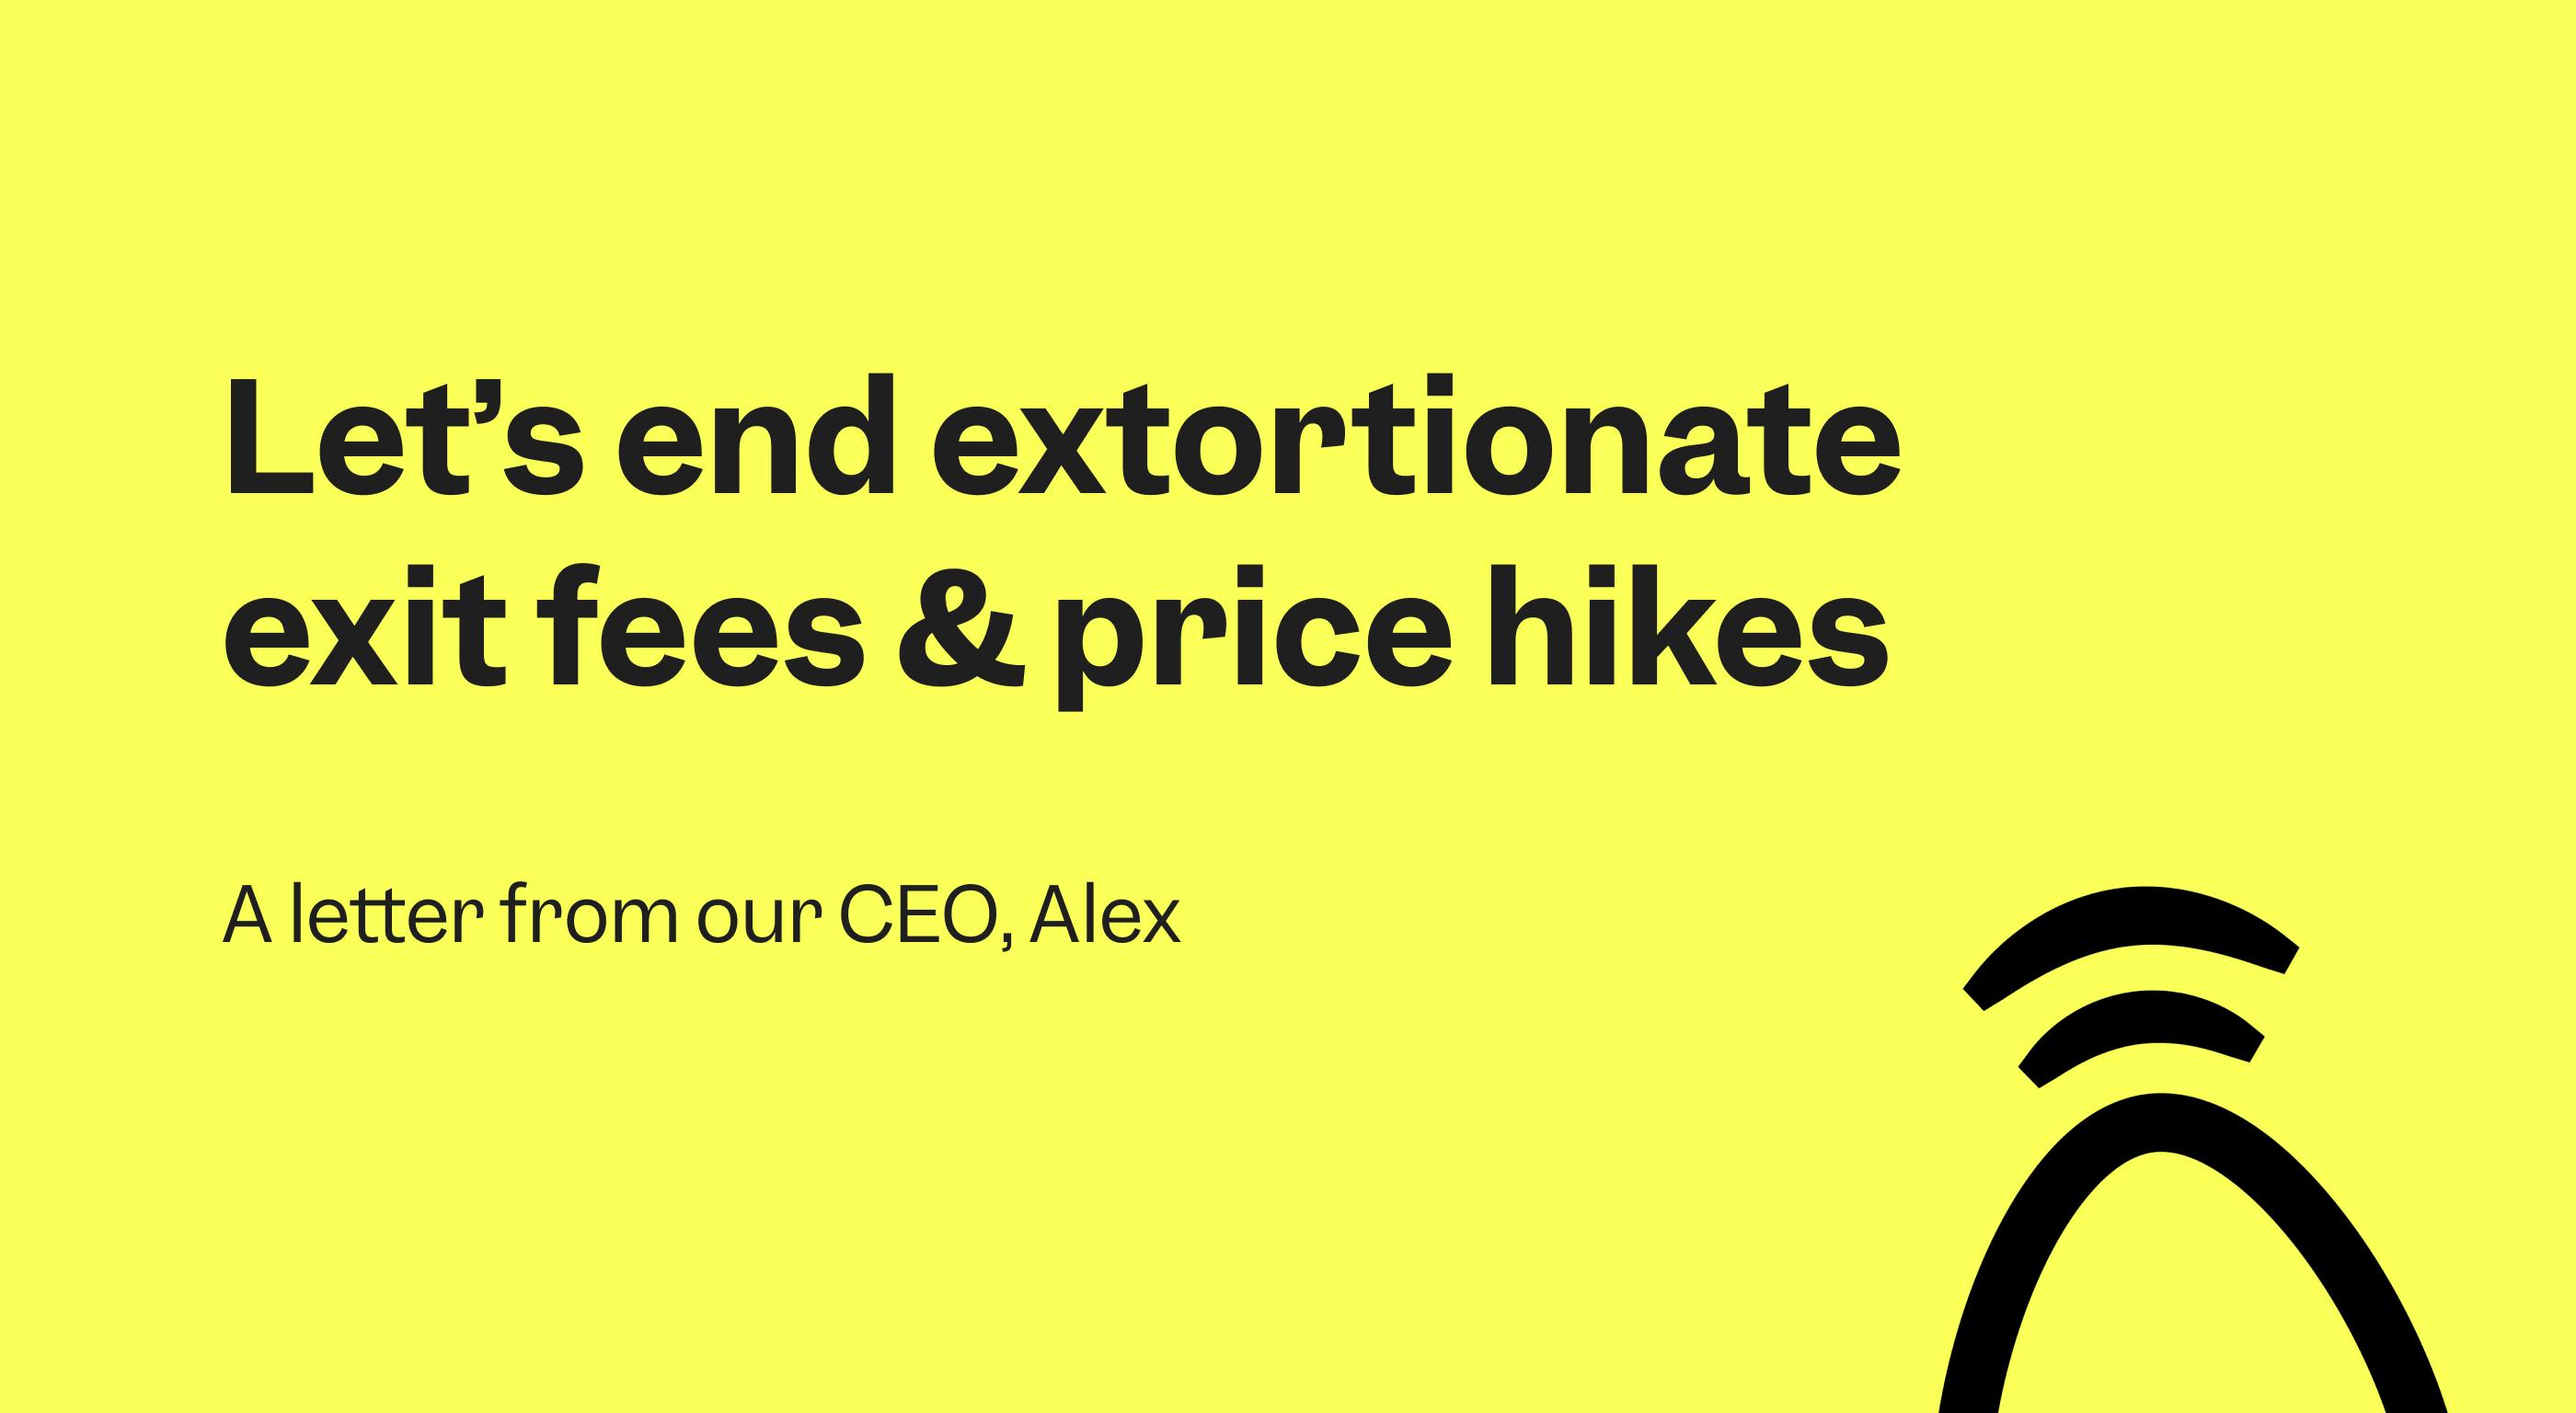 We urge broadband providers to abolish extortionate exit fees and end the £1.3bn price hike swindle now